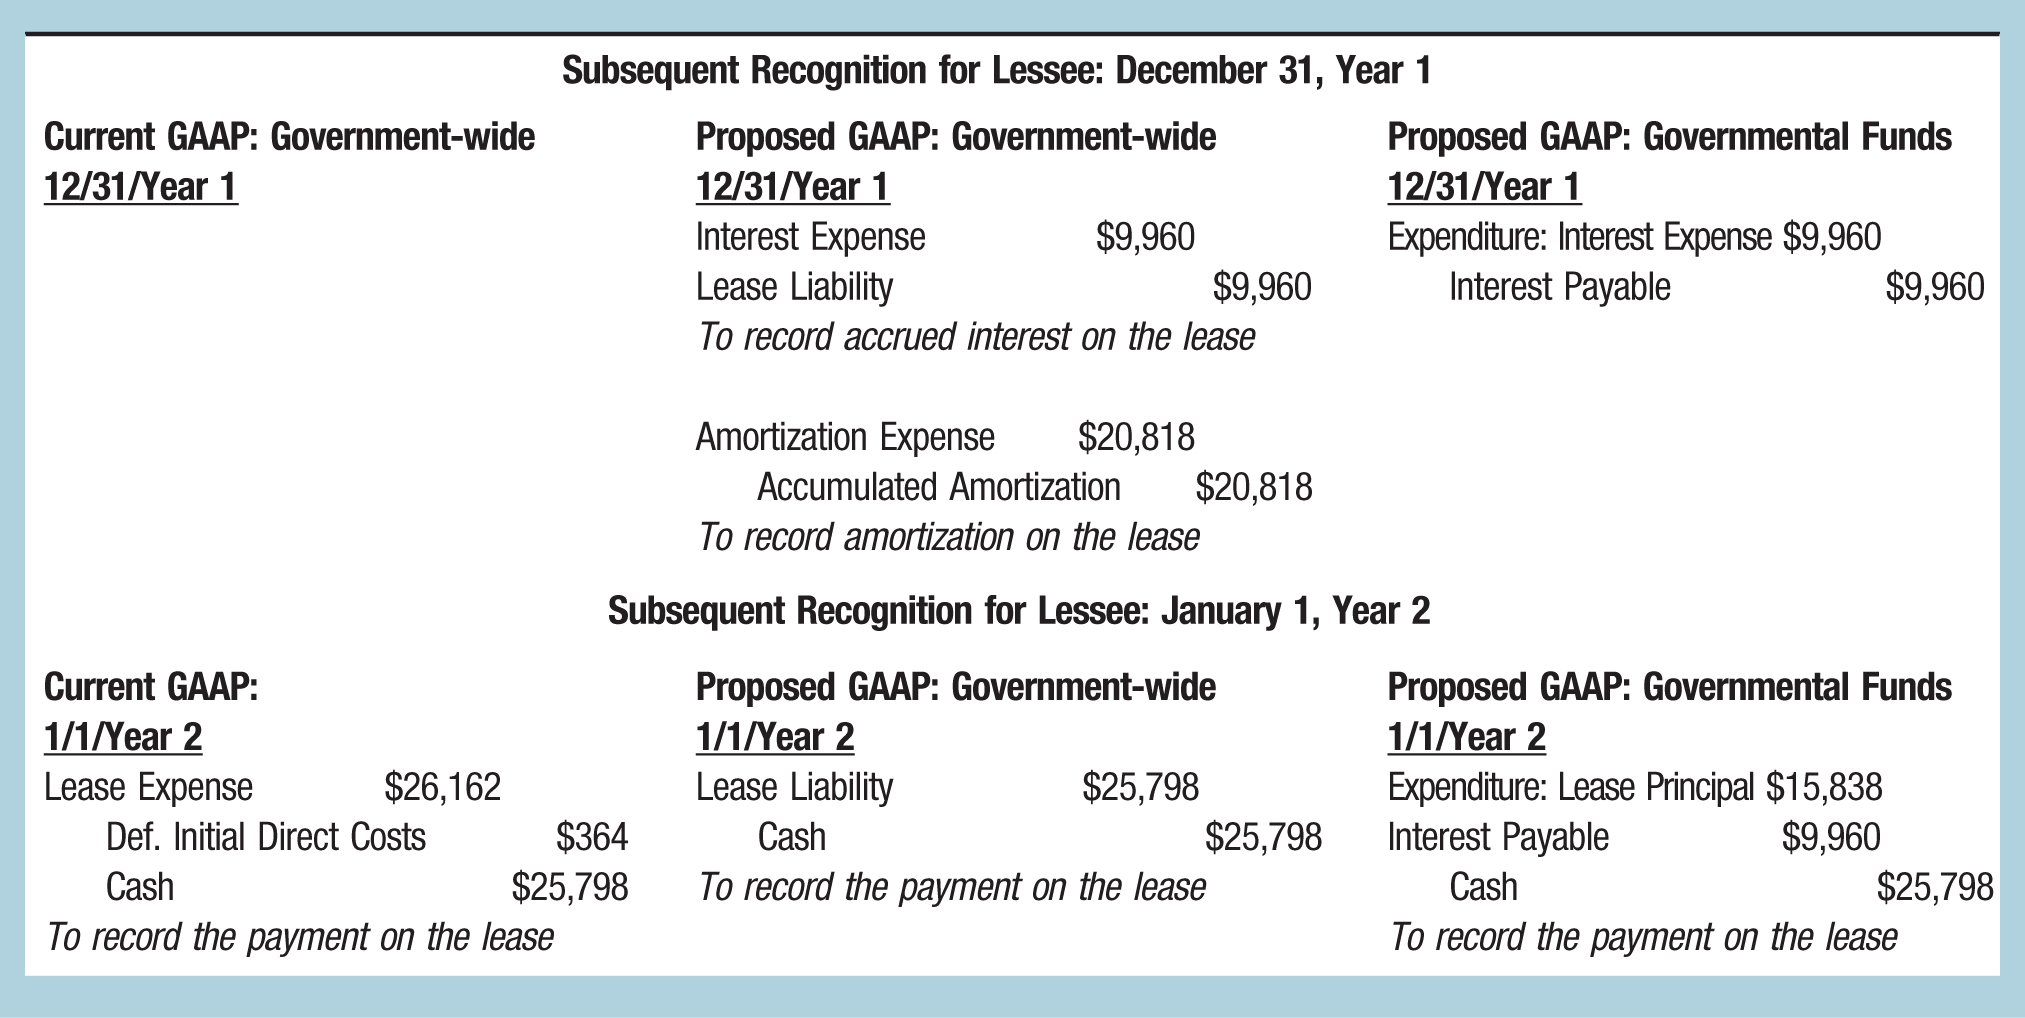 Subsequent Recognition for Lessee: December 31, Year 1 Current GAAP: Government-wide; Proposed GAAP: Government-wide; Proposed GAAP: Governmental Funds 12/31/Year 1; 12/31/Year 1; 12/31/Year 1 Interest Expense; $9,960; Expenditure: Interest Expense $9,960 Lease Liability; $9,960; Interest Payable; $9,960 To record accrued interest on the lease Amortization Expense; $20,818 Accumulated Amortization; $20,818 To record amortization on the lease Subsequent Recognition for Lessee: January 1, Year 2 Current GAAP:; Proposed GAAP: Government-wide; Proposed GAAP: Governmental Funds 1/1/Year 2; 1/1/Year 2; 1/1/Year 2 Lease Expense; $26,162; Lease Liability; $25,798; Expenditure: Lease Principal $15,838 Def. Initial Direct Costs; $364; Cash; $25,798; Interest Payable; $9,960 Cash; $25,798; To record the payment on the lease; Cash; $25,798 To record the payment on the lease; To record the payment on the lease